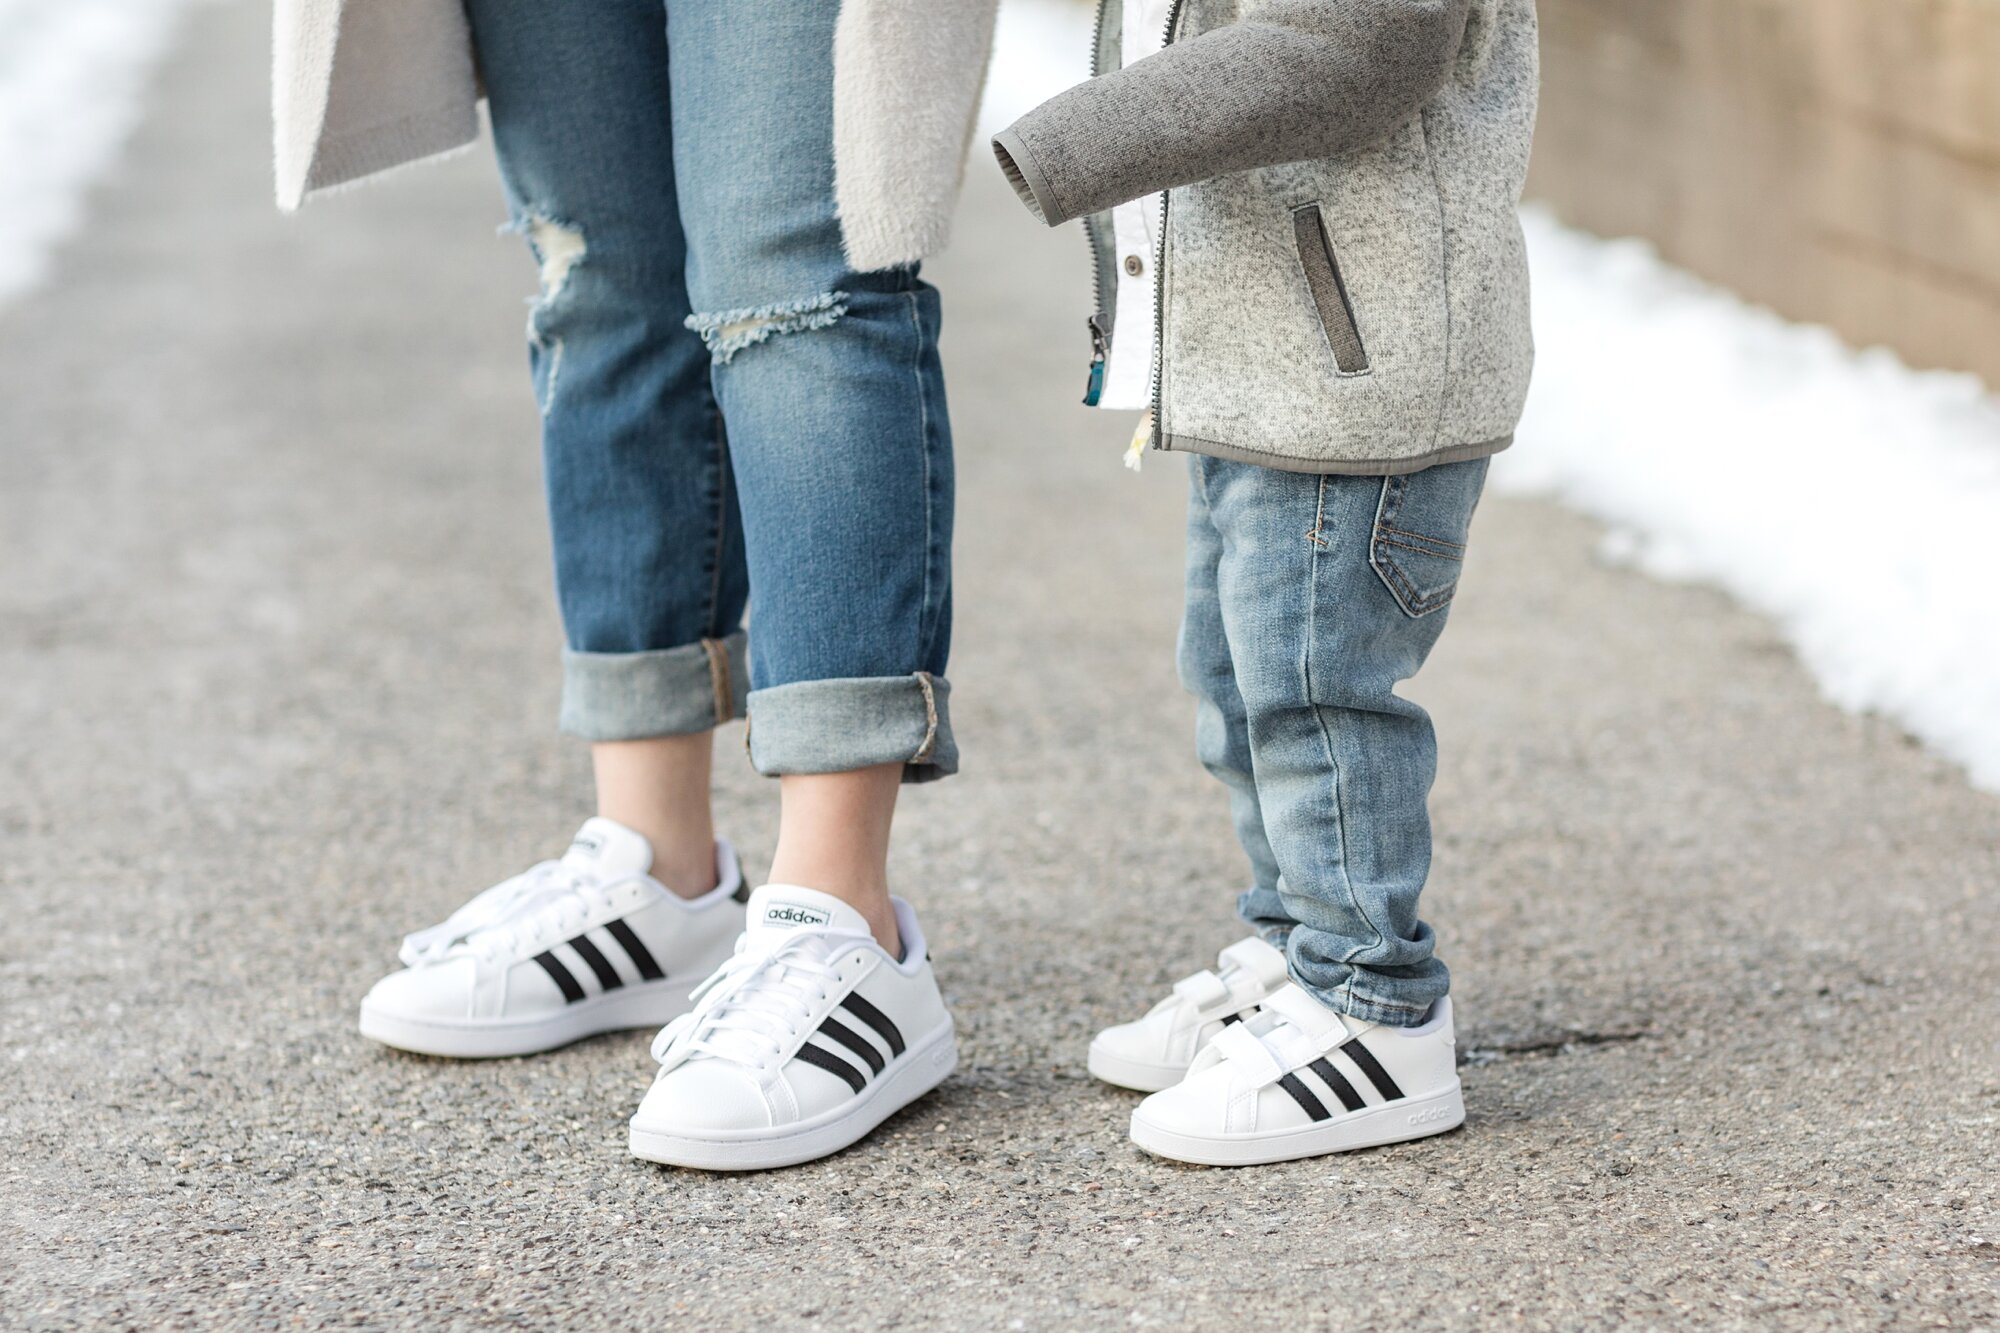  How cute are these two with their matching kicks! 